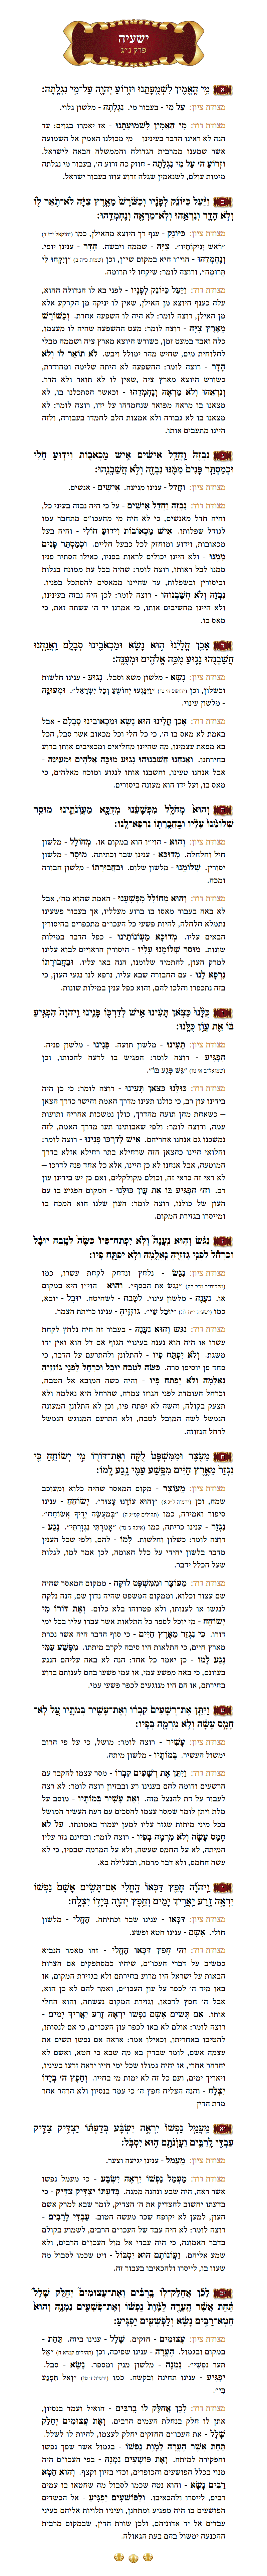 Sefer Yeshayohu Chapter 53 with commentary